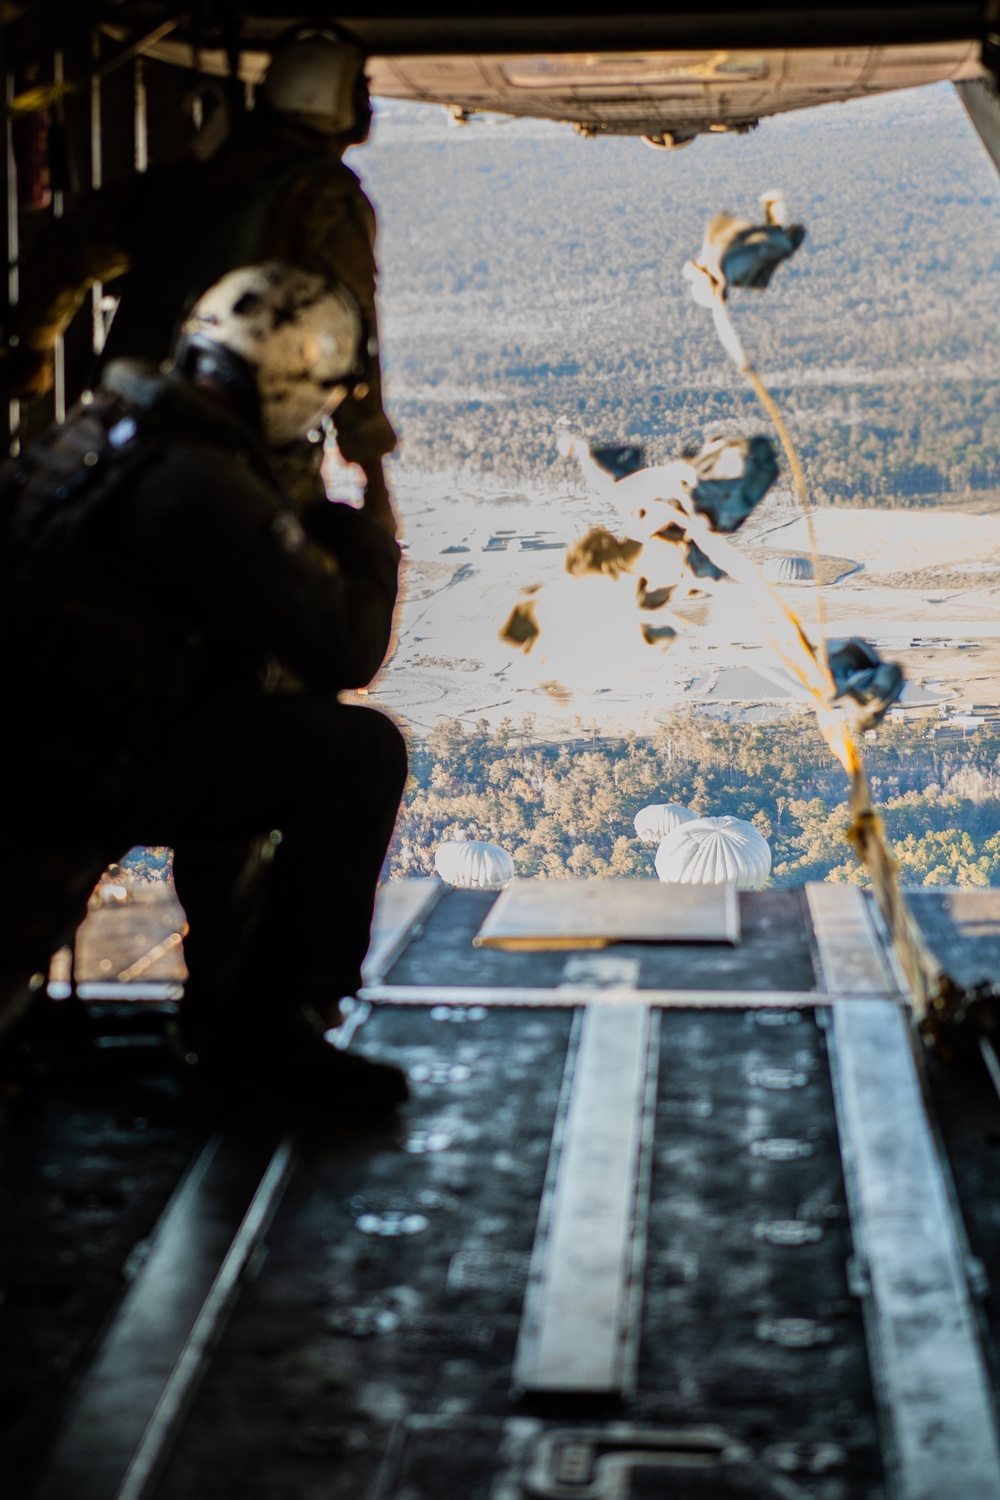 Air Force, Marine Corps, Army National Guard Airborne Operation Training